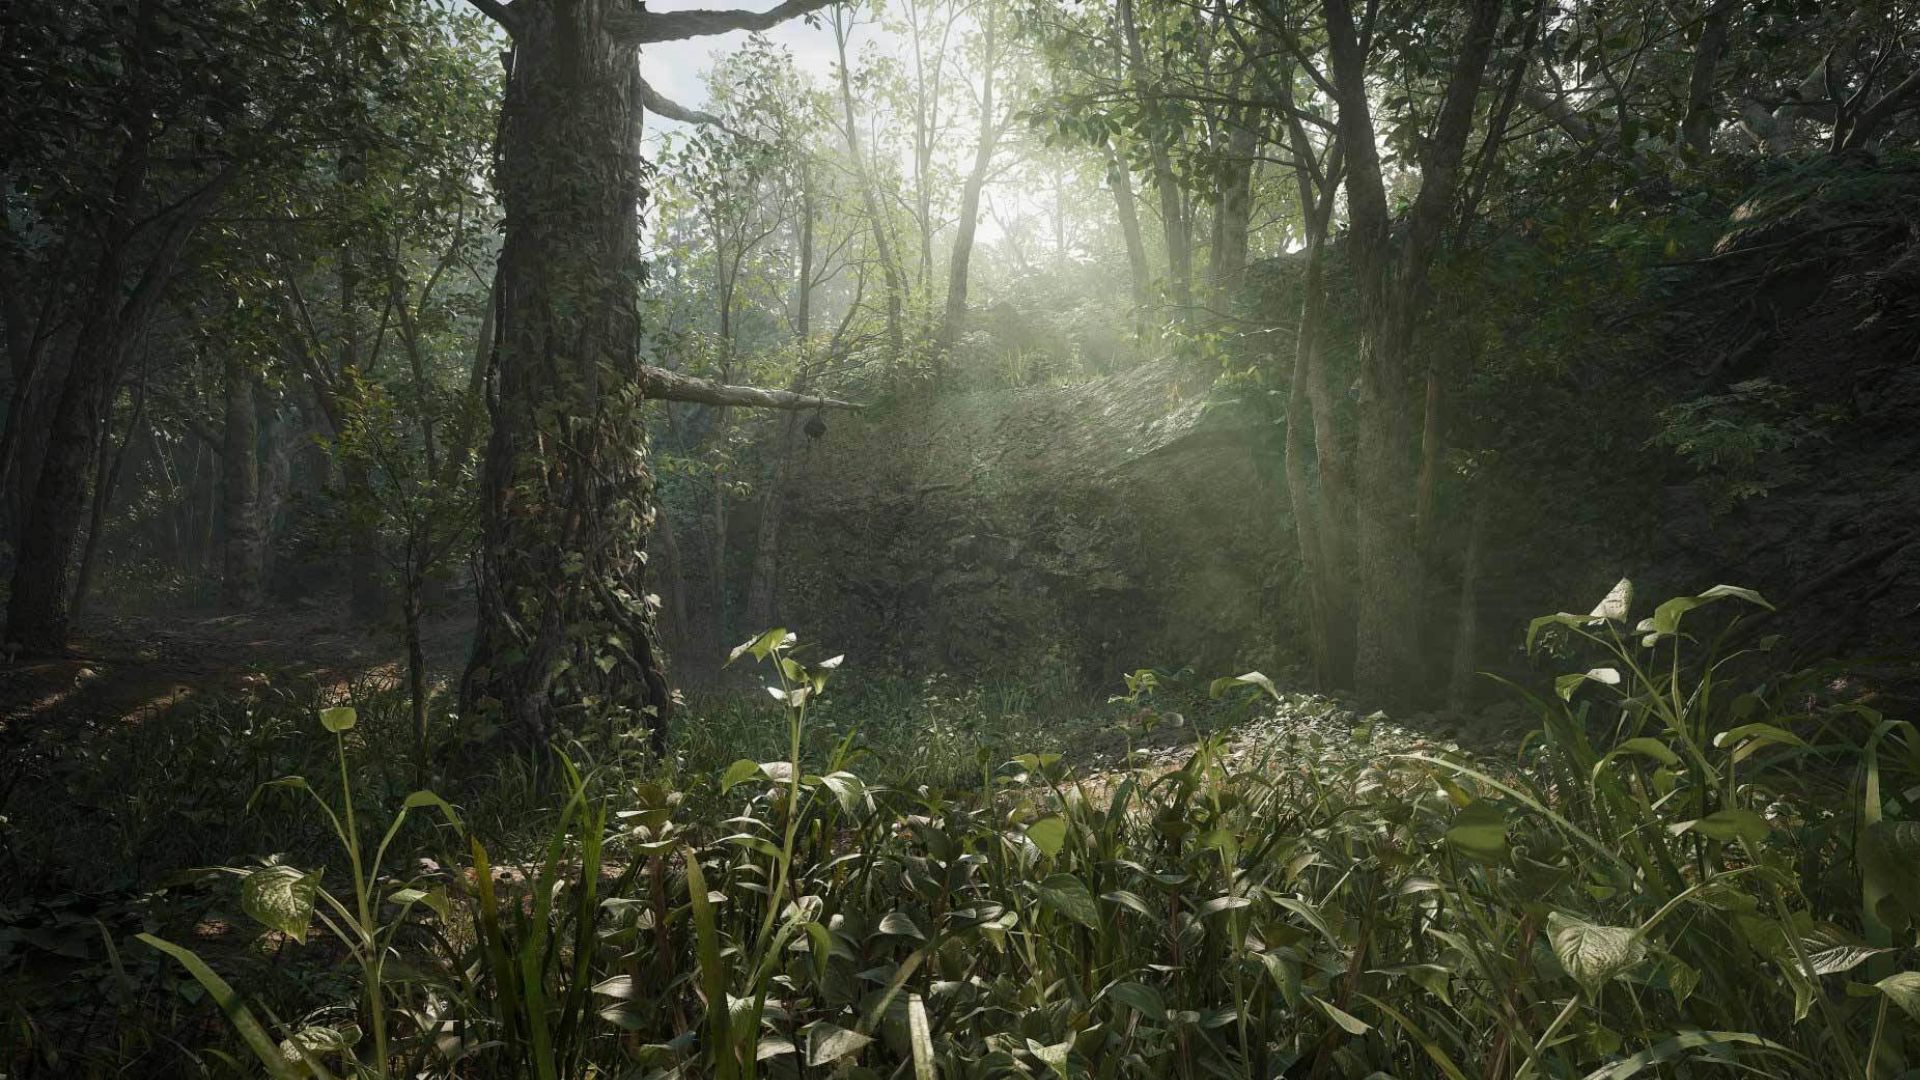 A long shot of the jungle settling in Metal Gear Solid 3 Snake Eater remake